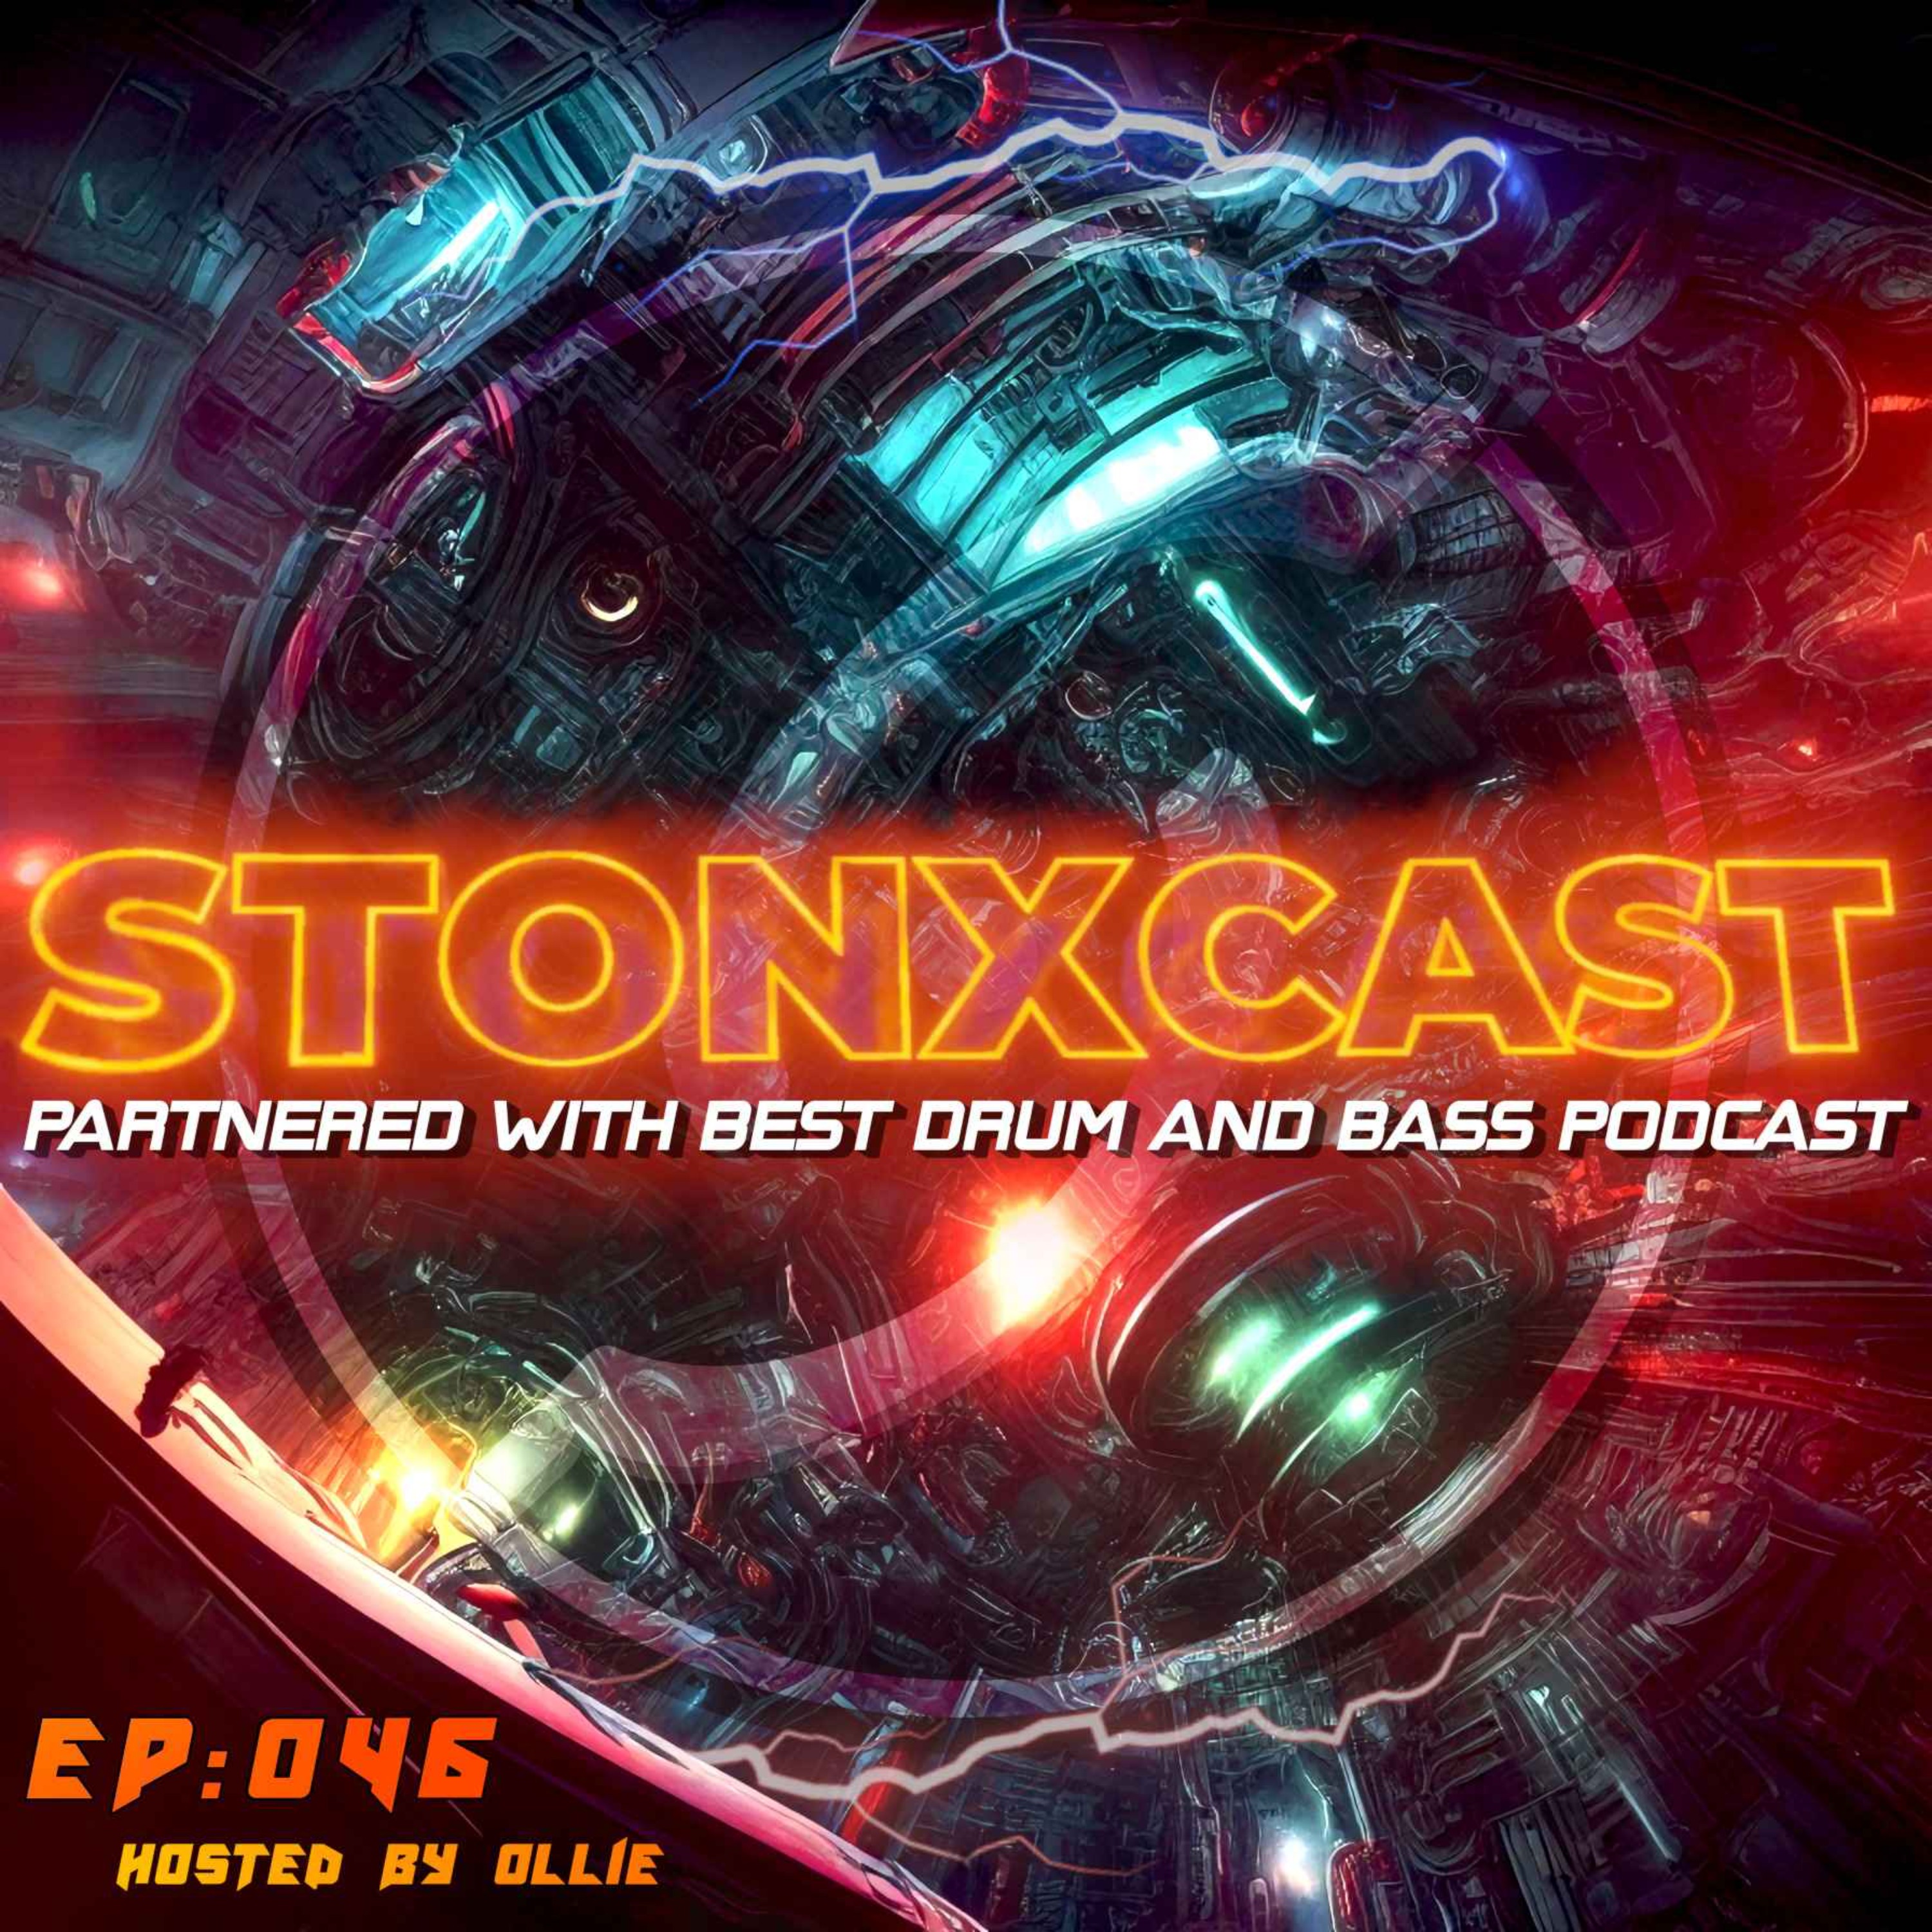 Stonxcast EP:046 - Hosted by Ollie Artwork